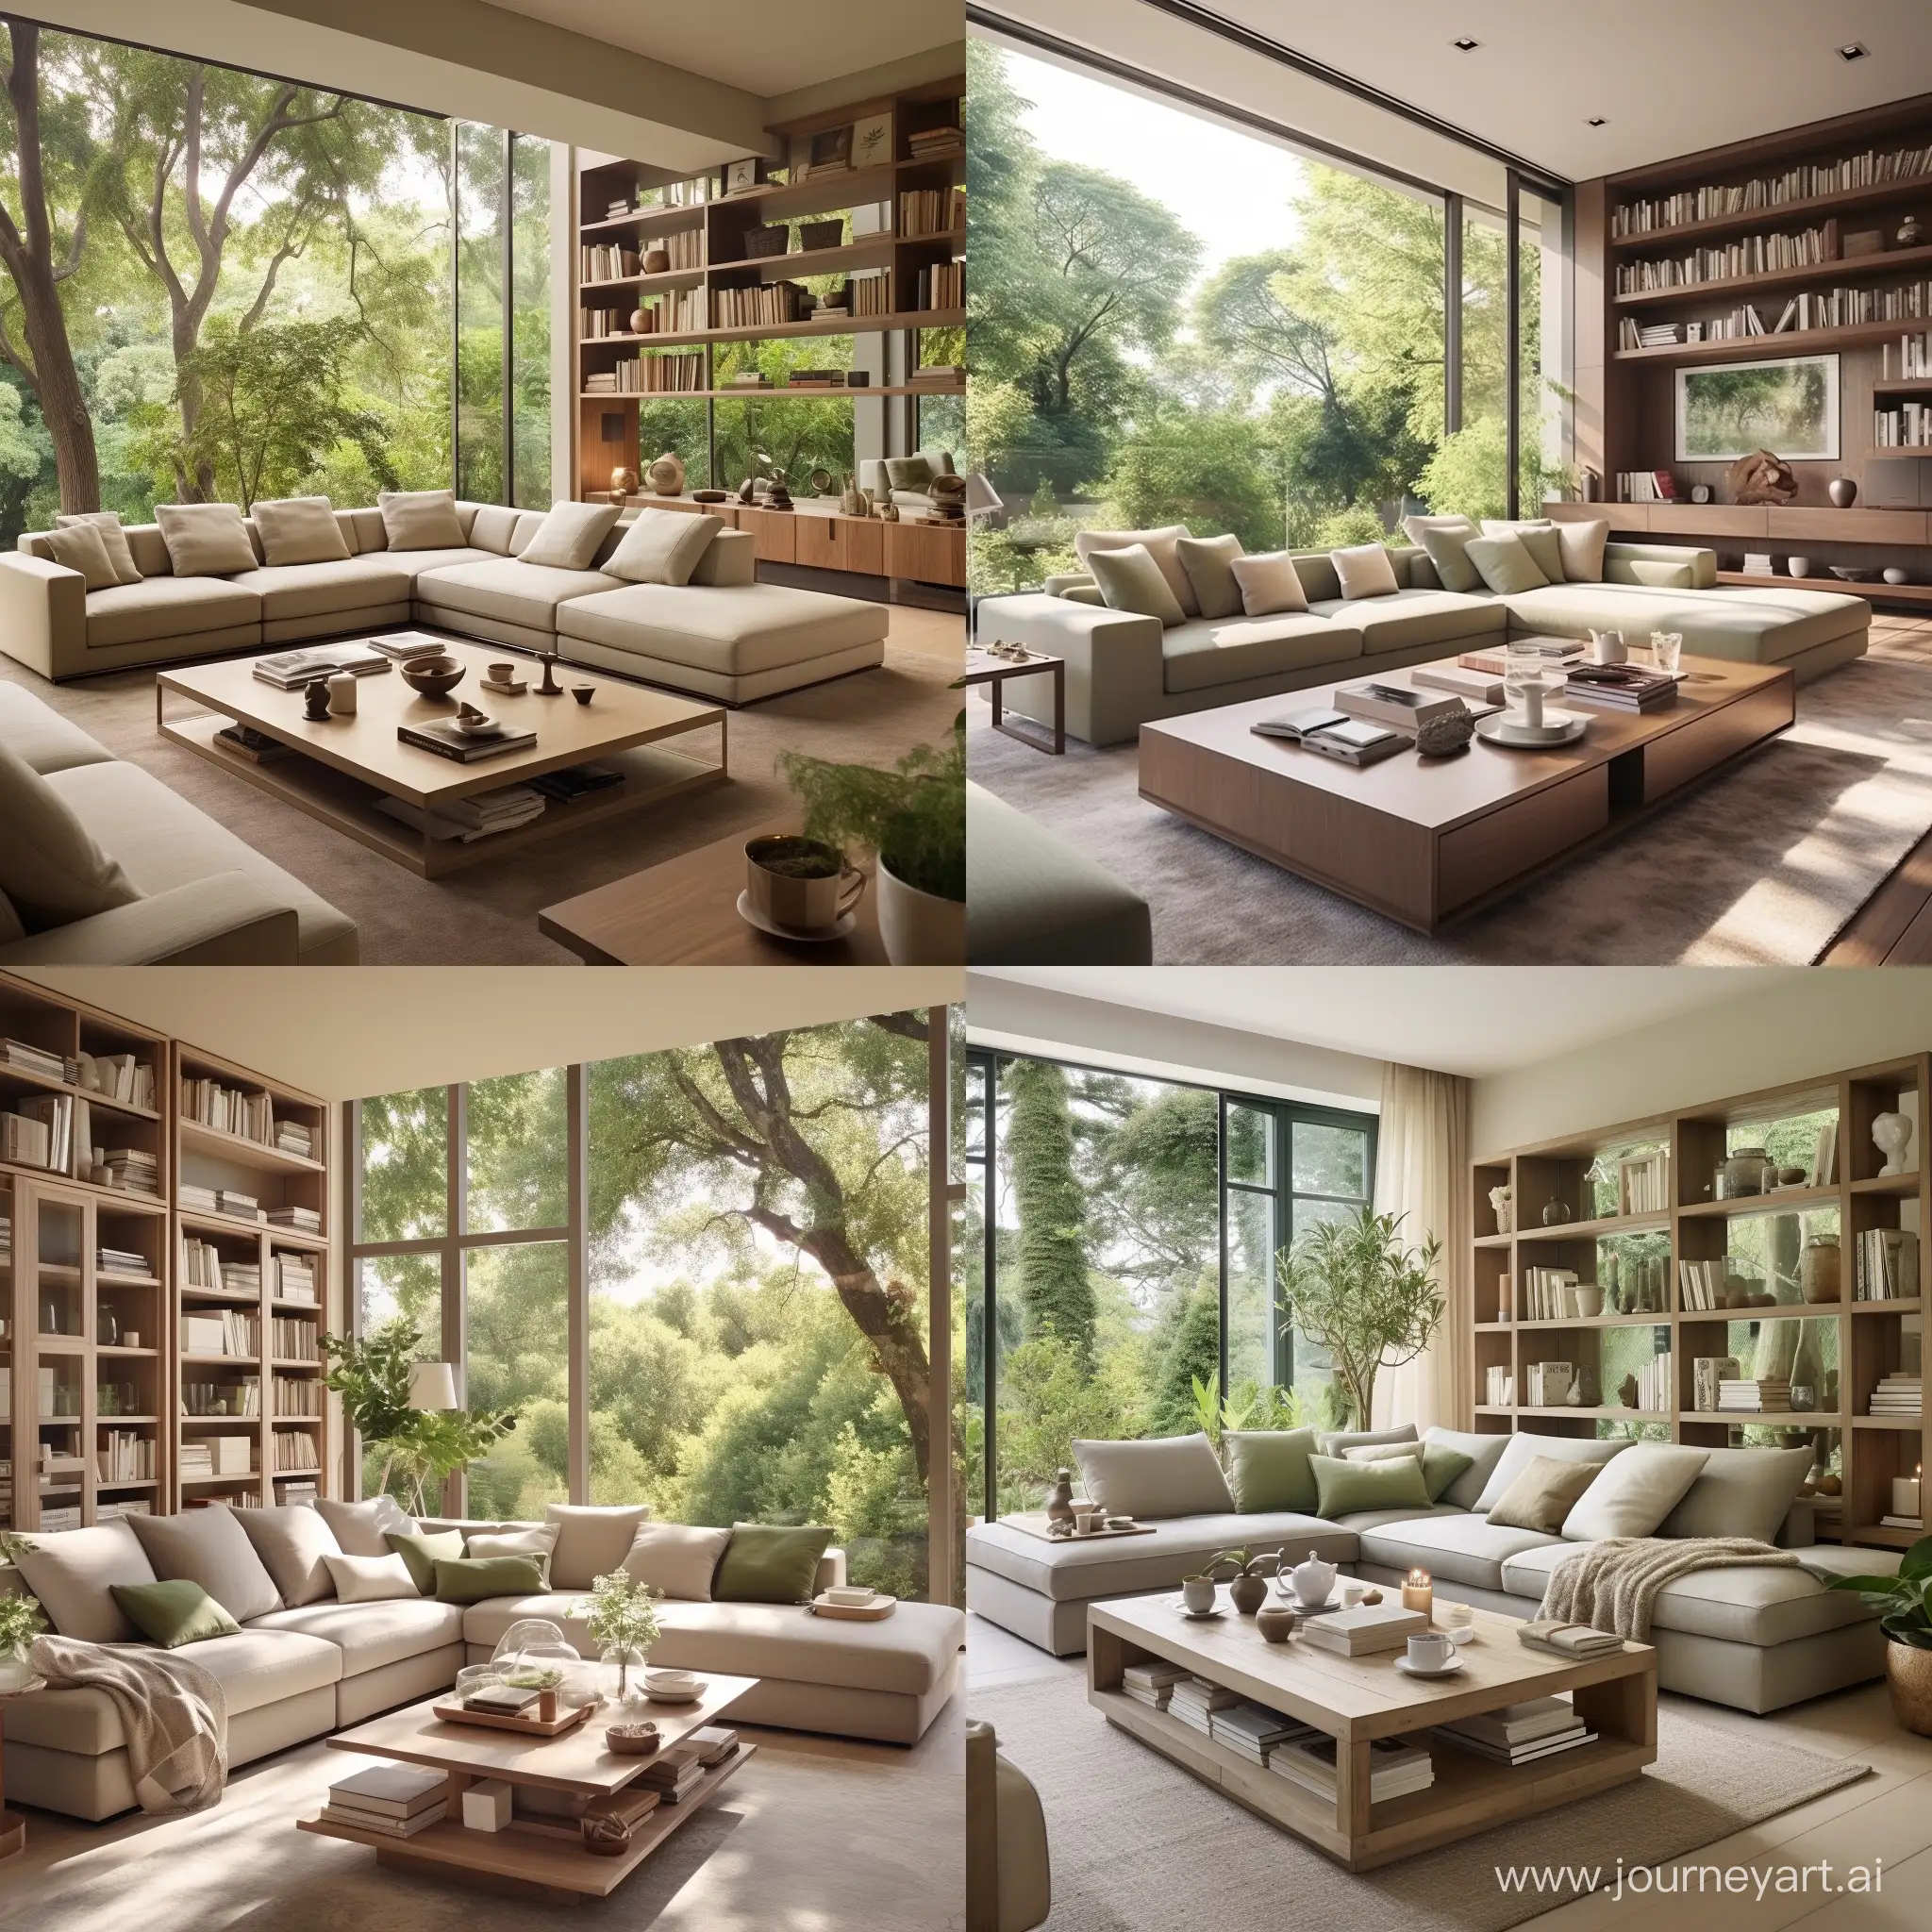 Spacious-Modern-Living-Room-with-Stylish-Furniture-and-Garden-Views